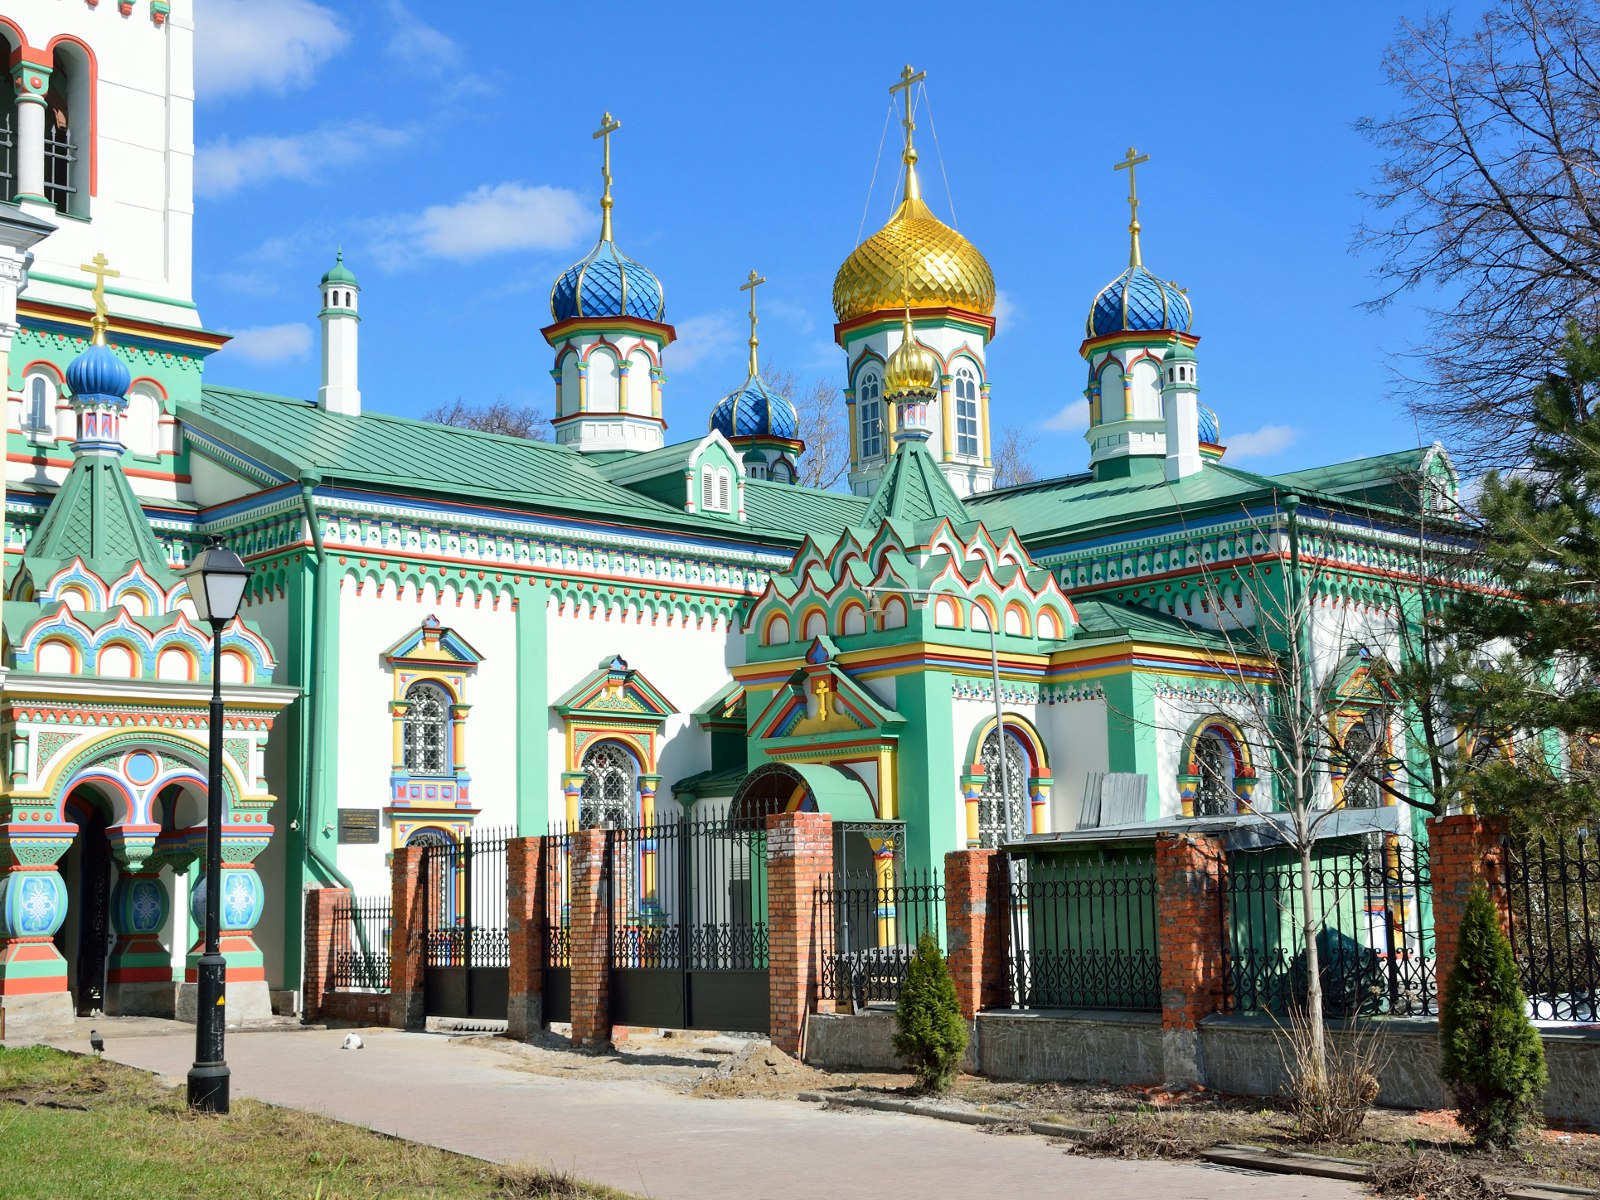 Colourful facade and onion-shaped domes of a Russian Orthodox church in Moscow